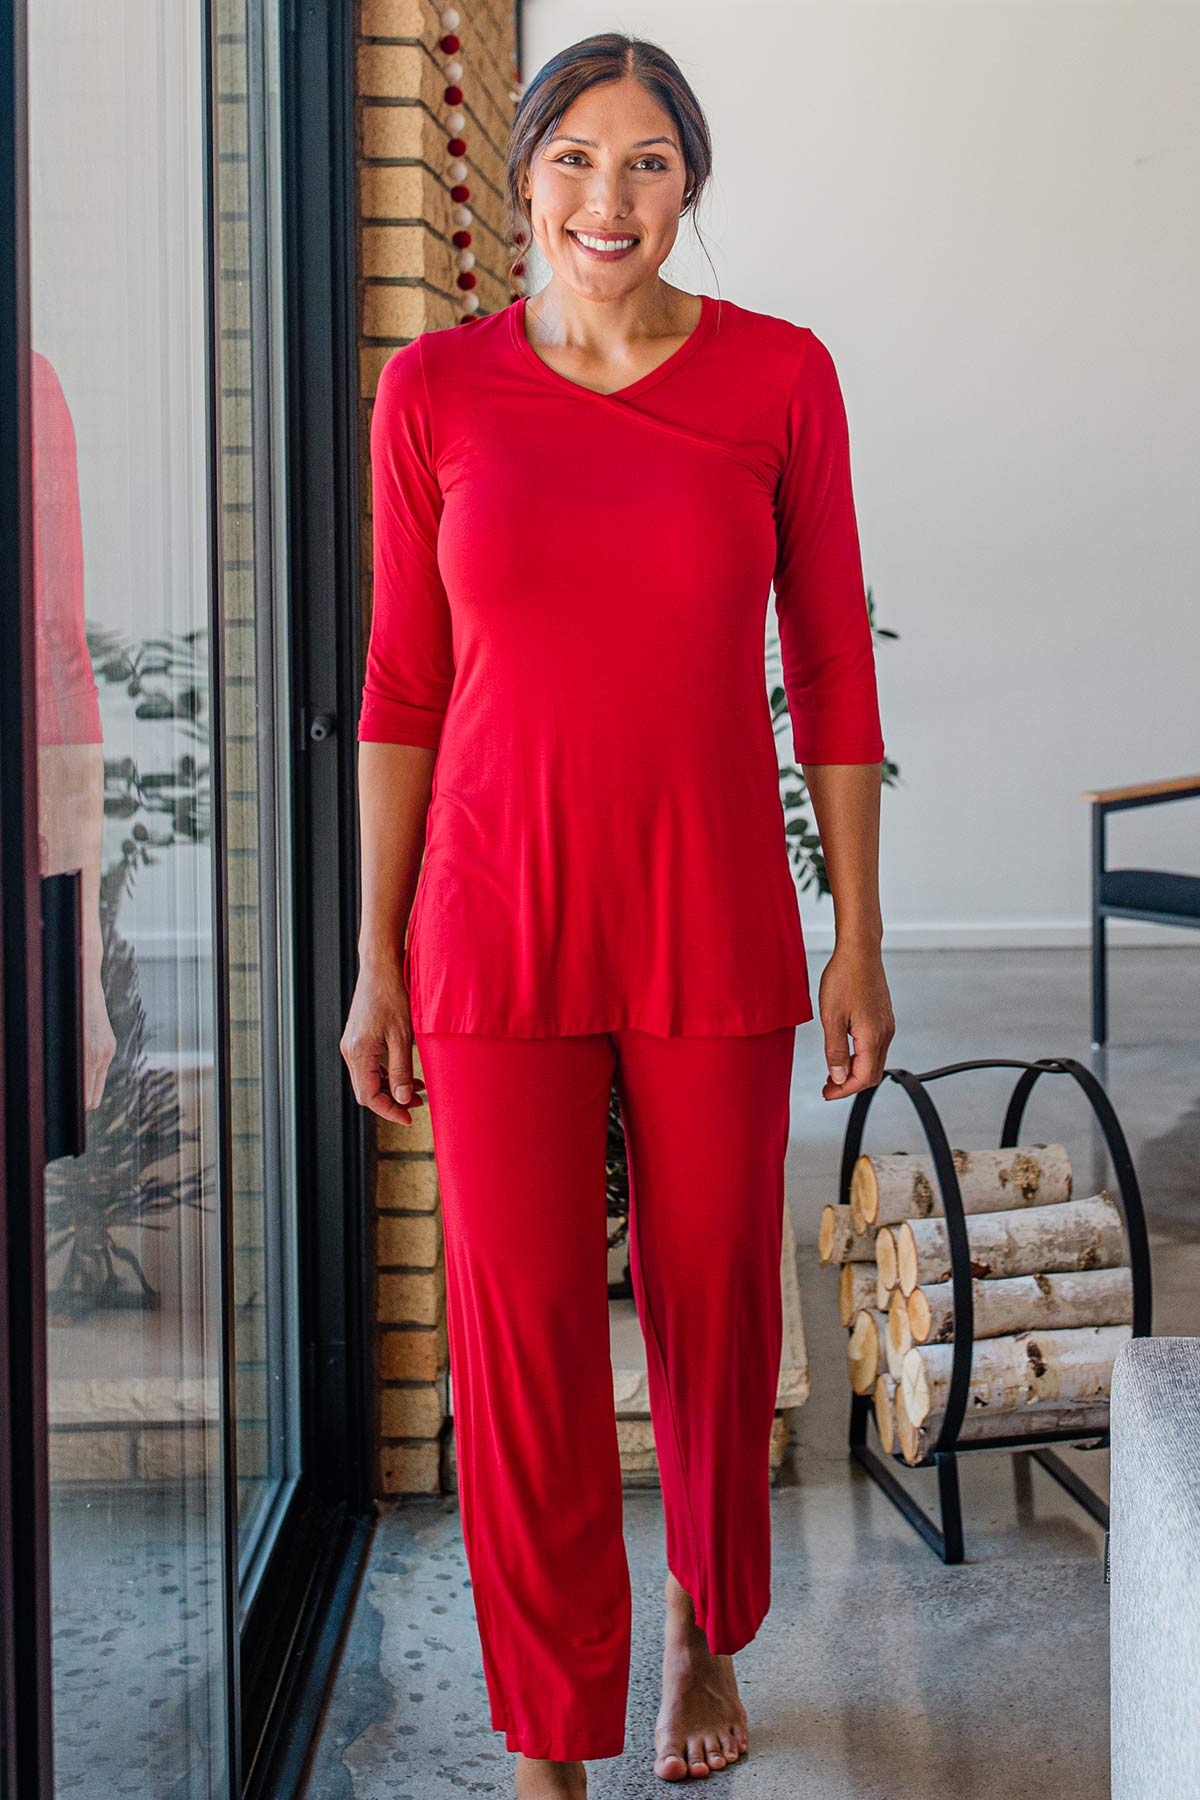 A woman standing and smiling, wearing Yala Haley Crossover Front Three Quarter Sleeve Bamboo Nightgown in Crimson